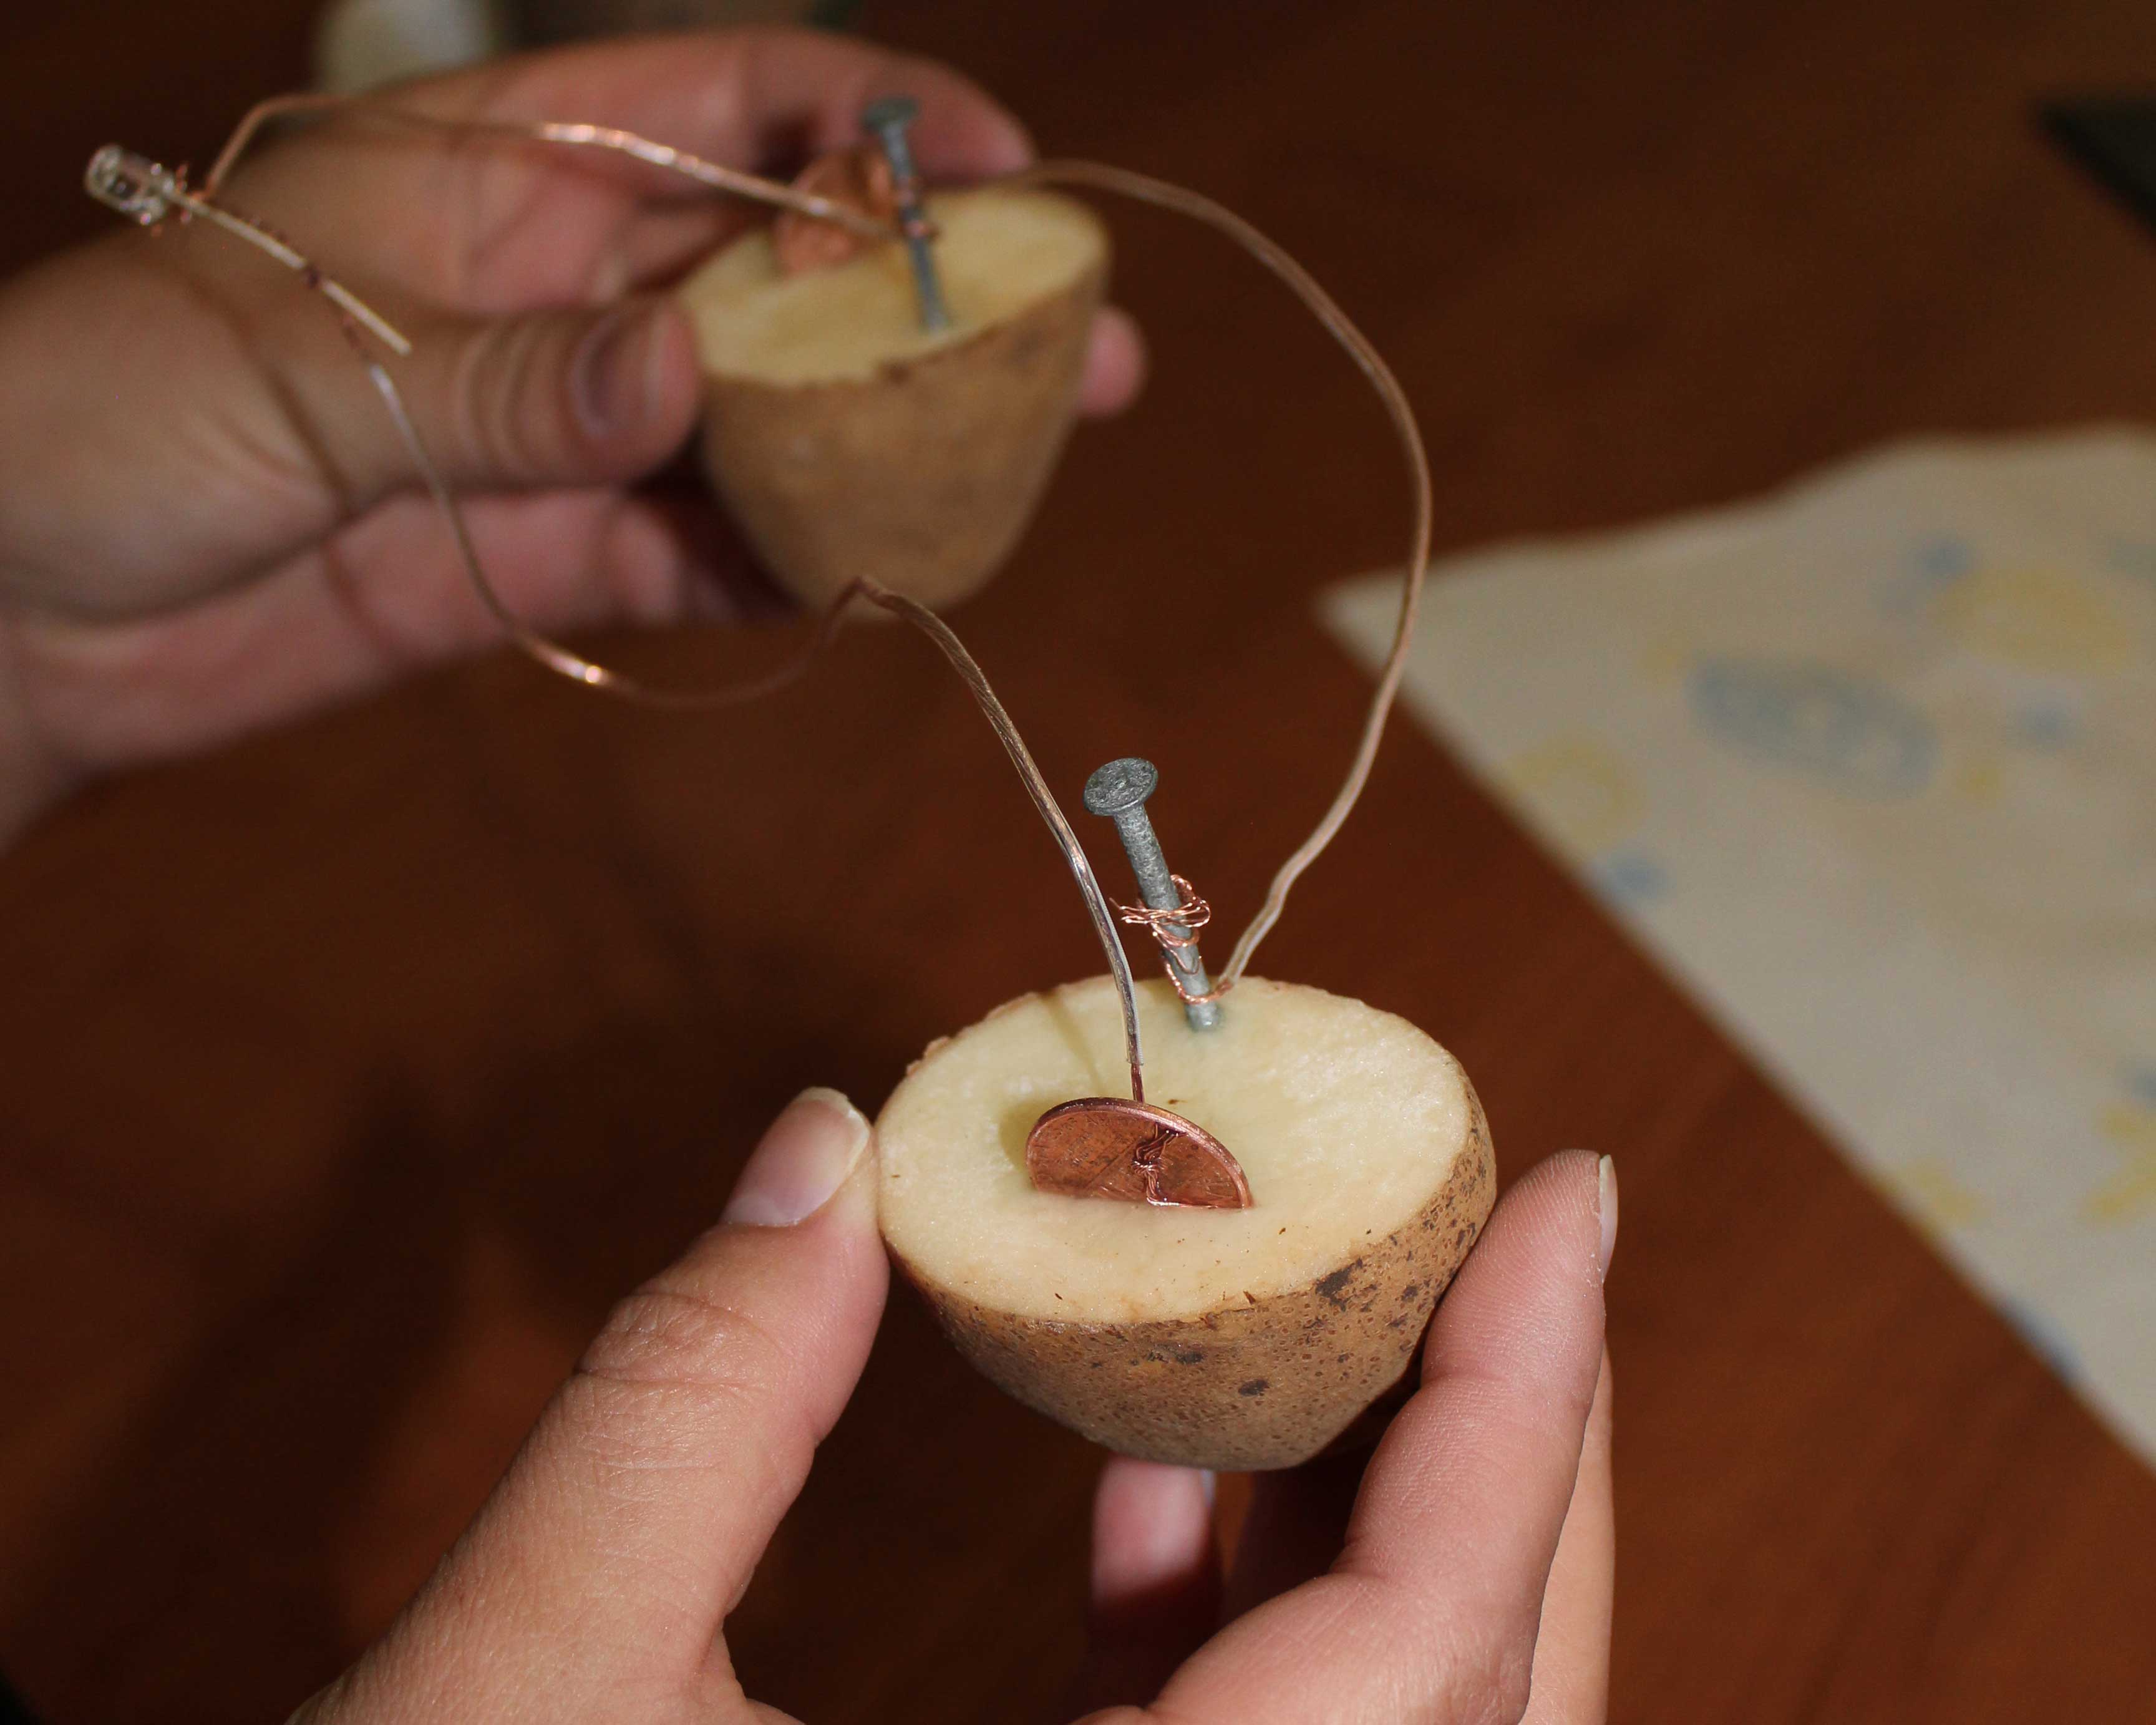 Potatoes Can Be Used To Charge Your Gadgets